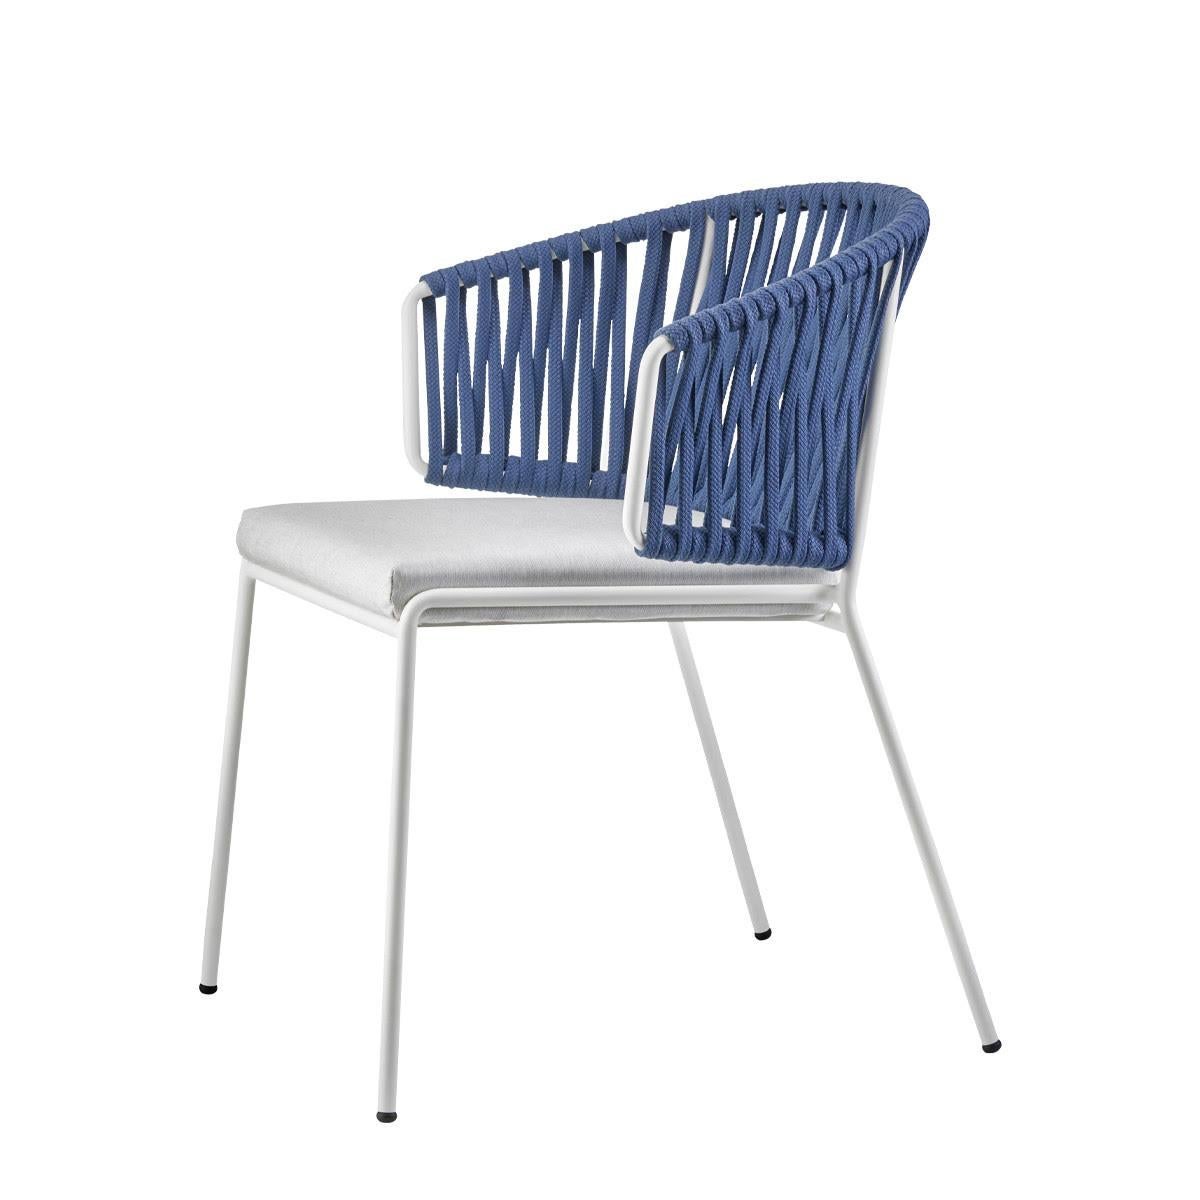 Modern Pair of Blue Outdoor or Indoor Metal and Cord Armchairs, 21 century For Sale